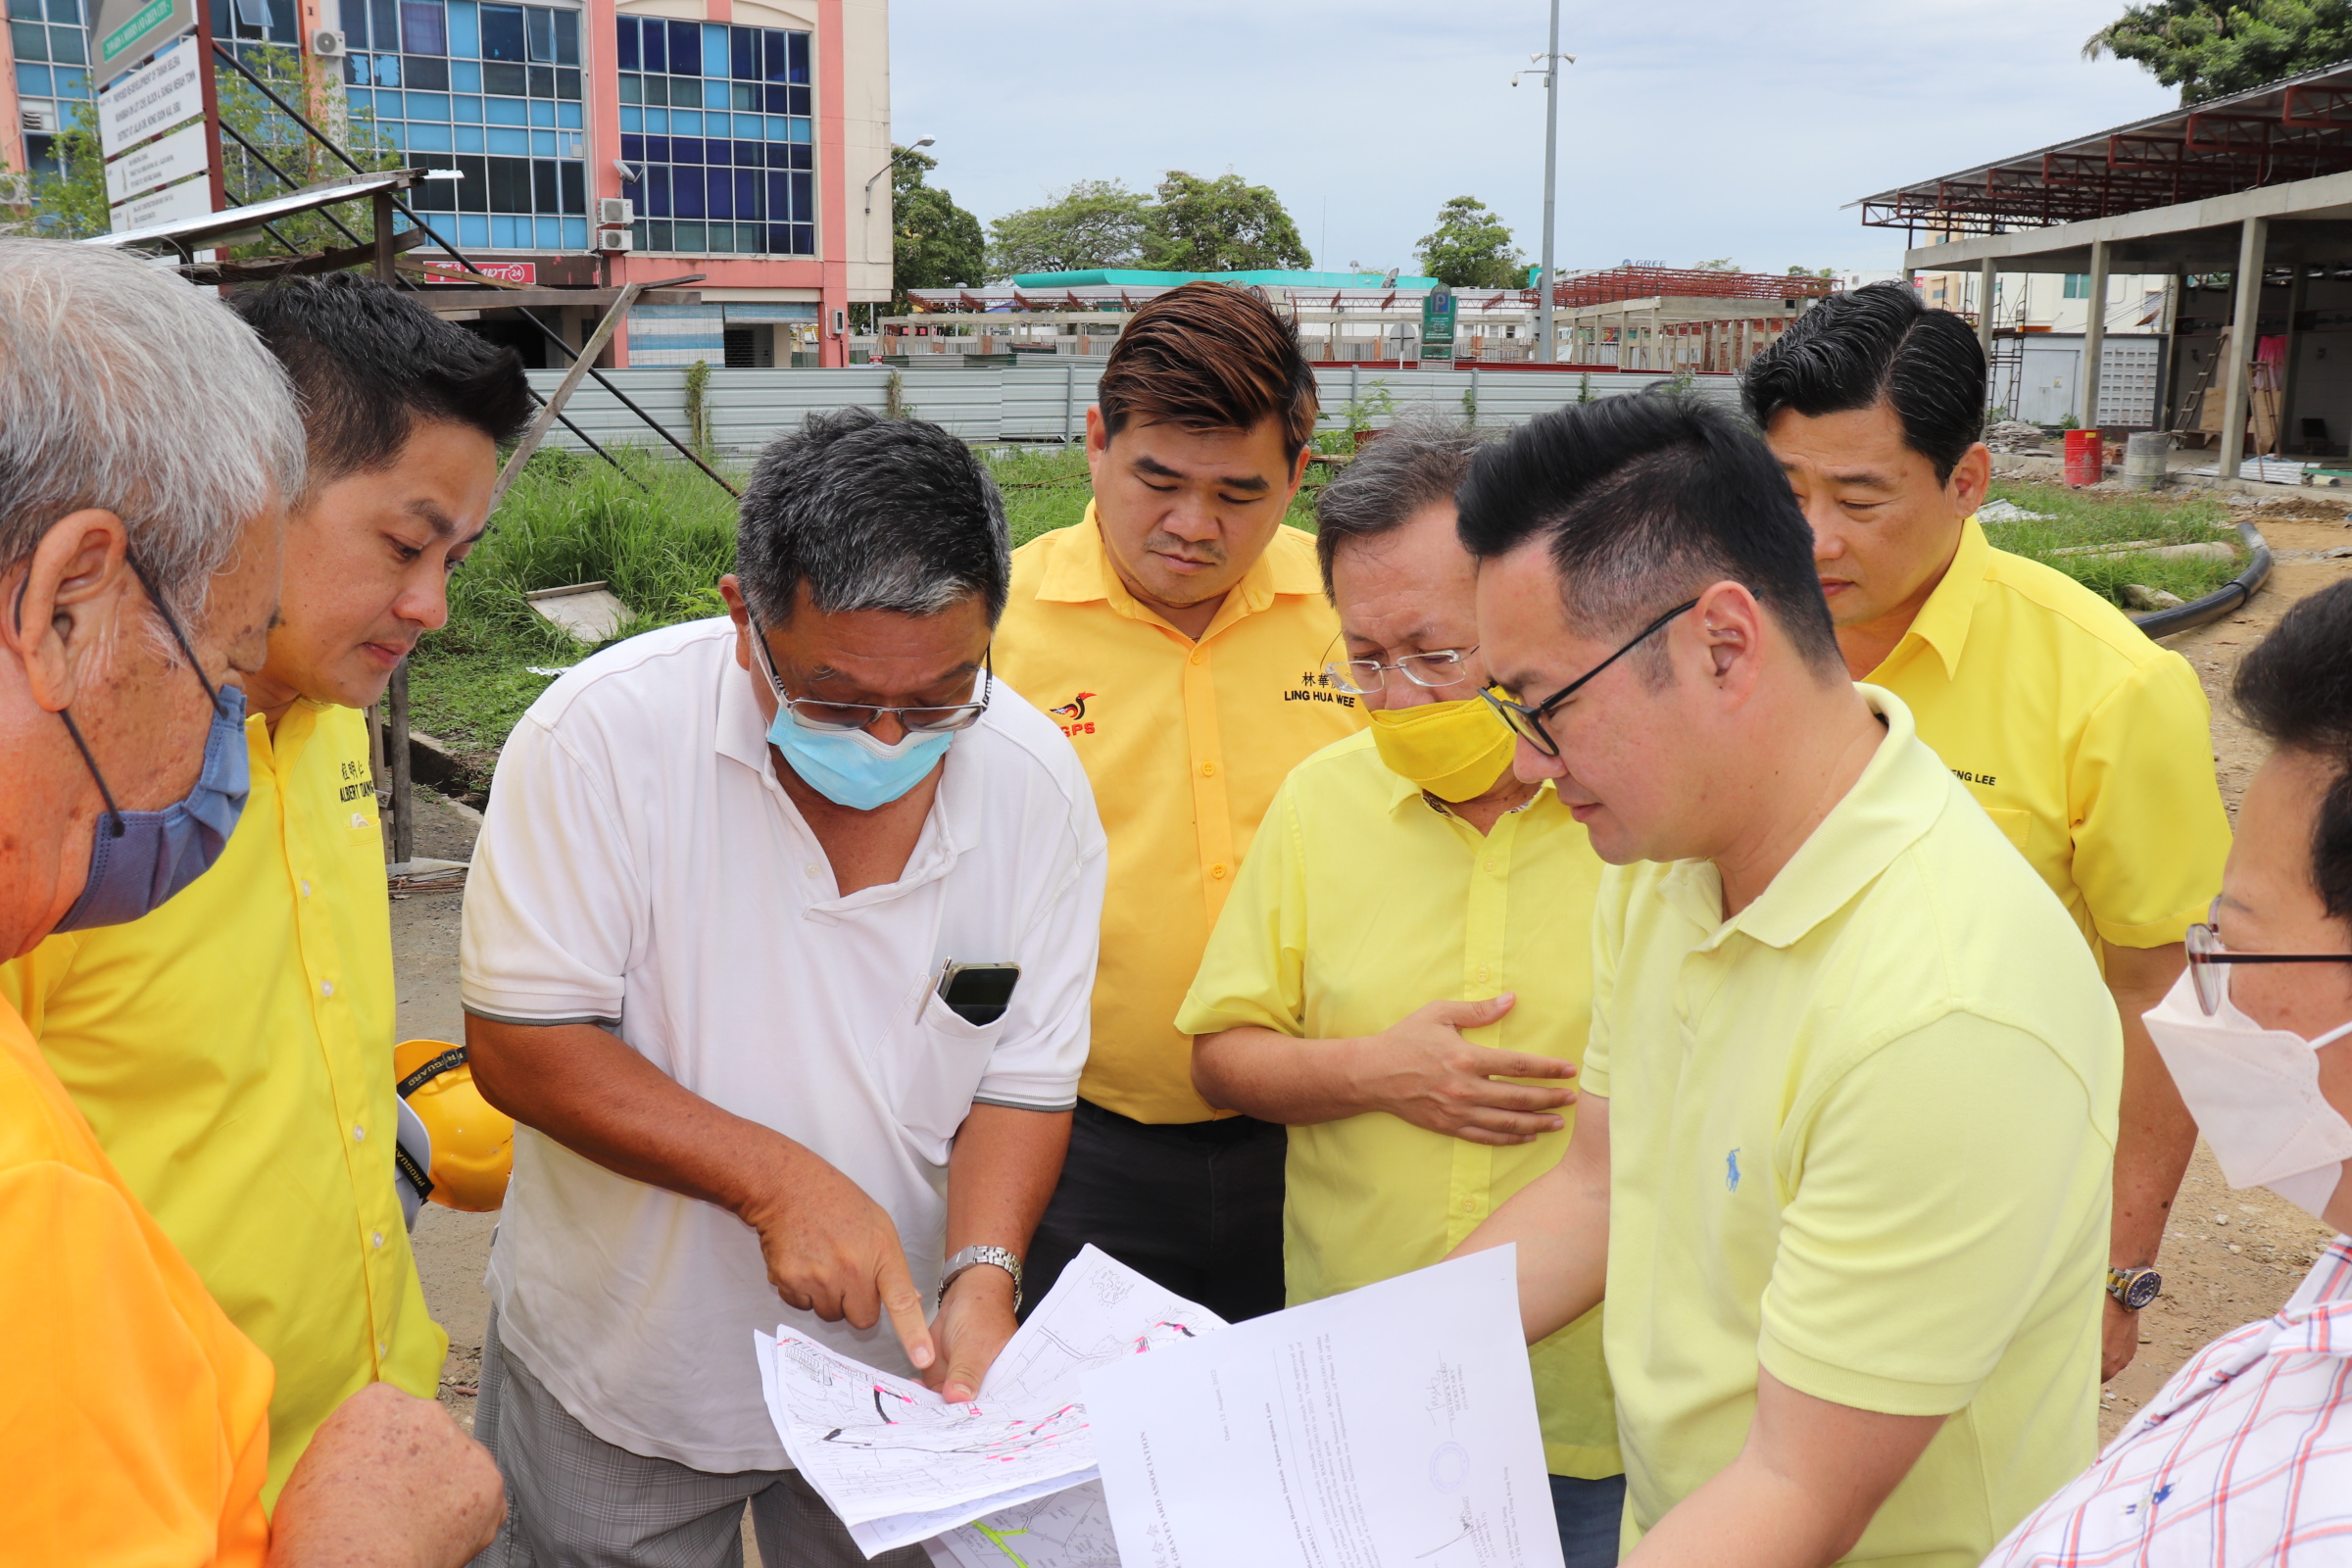 Dr Sim (third right) and Tiang (second right) are briefed on the Taman Selera Muhibbah project by the contractor. – Photo by Conny Banji